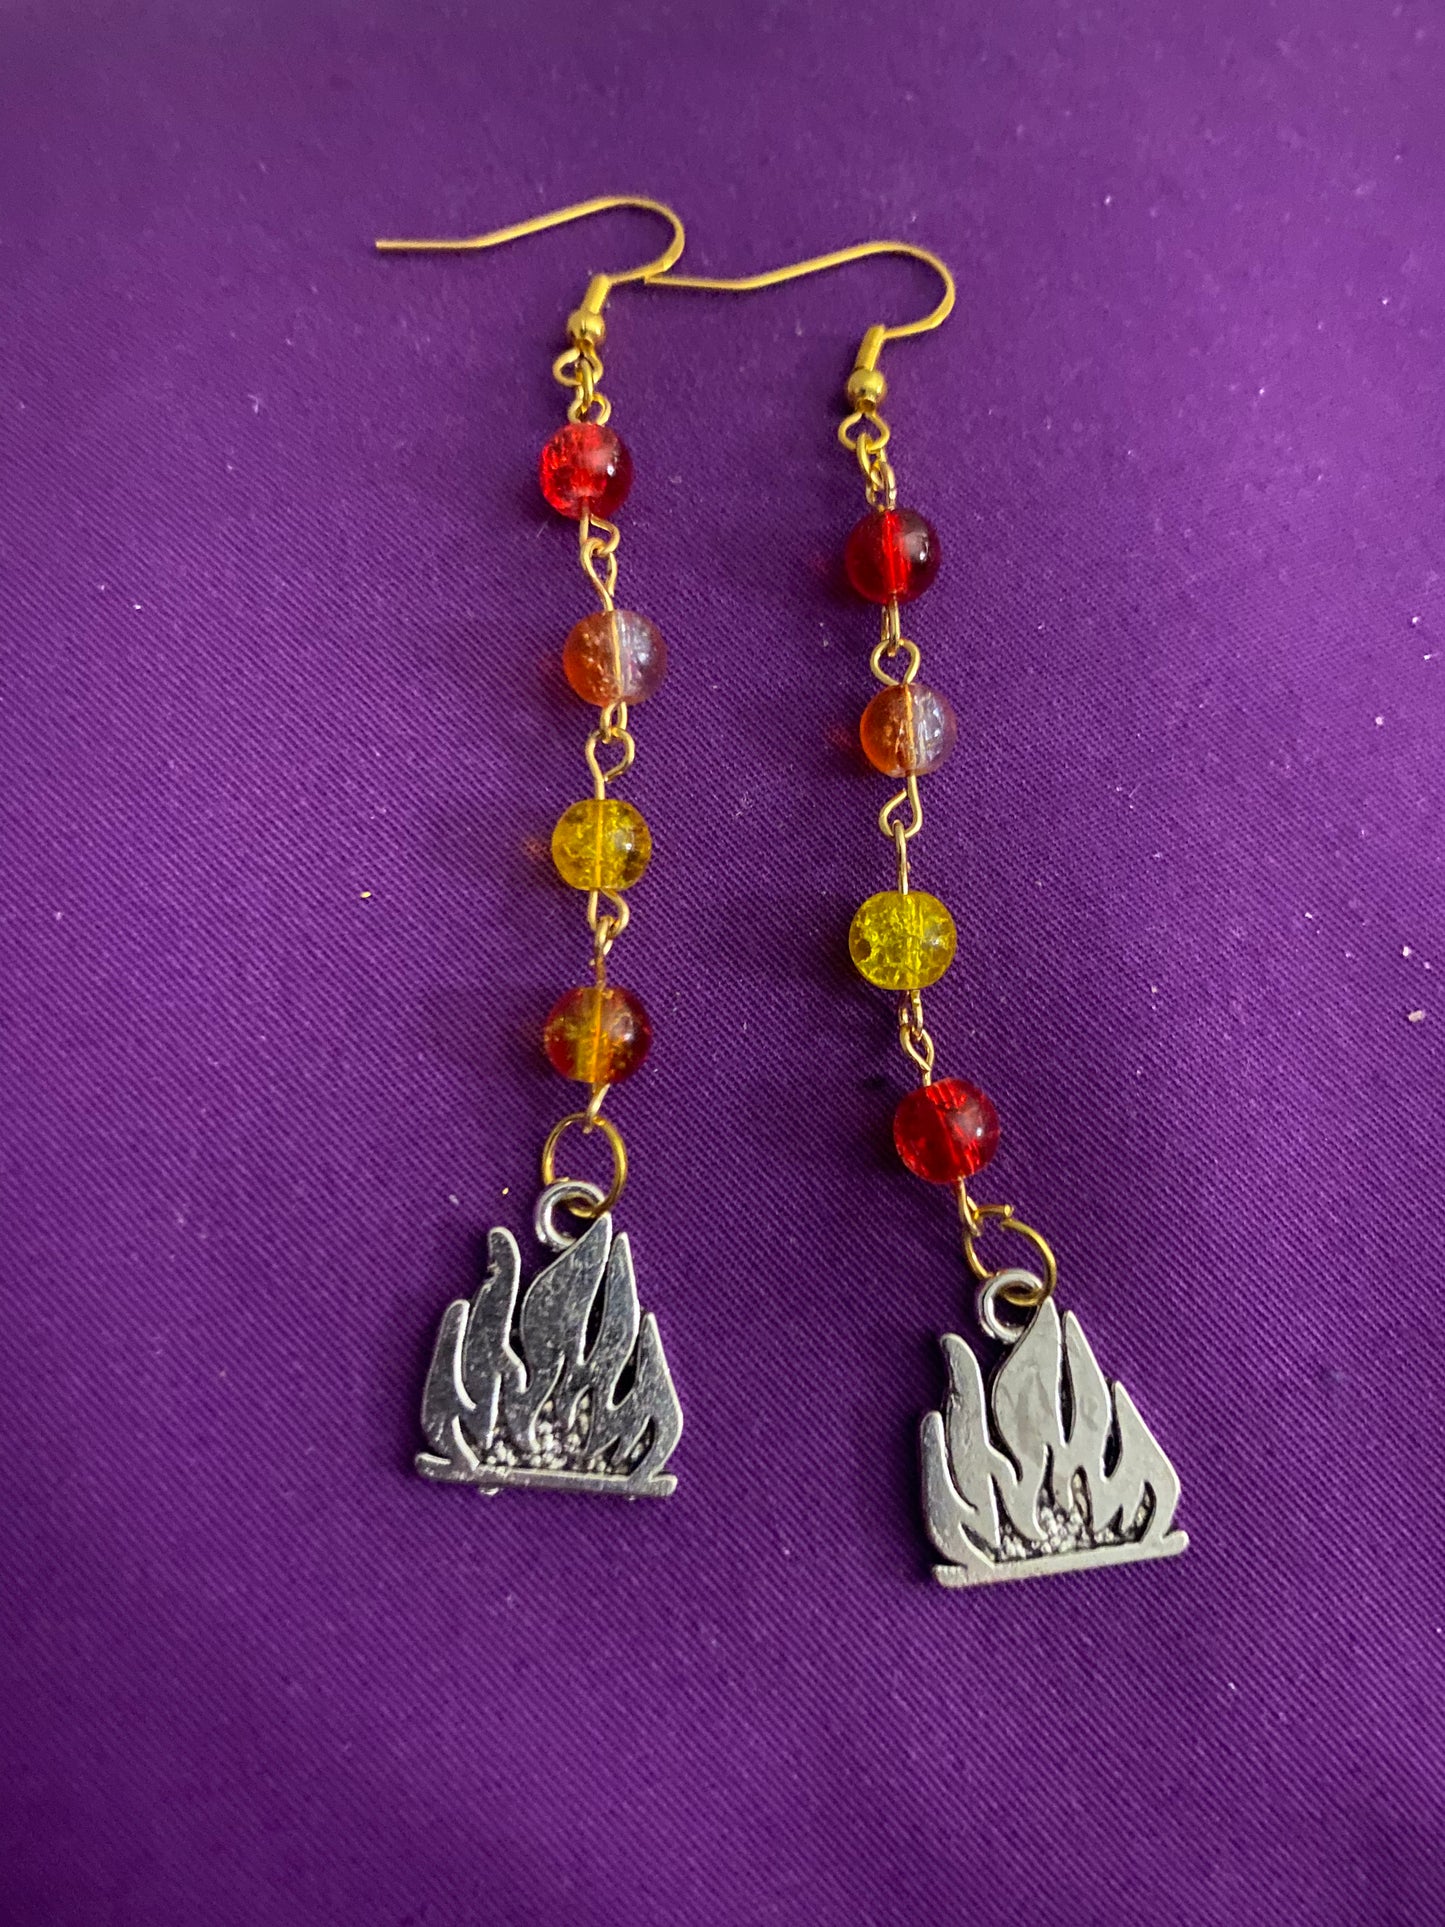 Entity Inspired Earrings: The Desolation